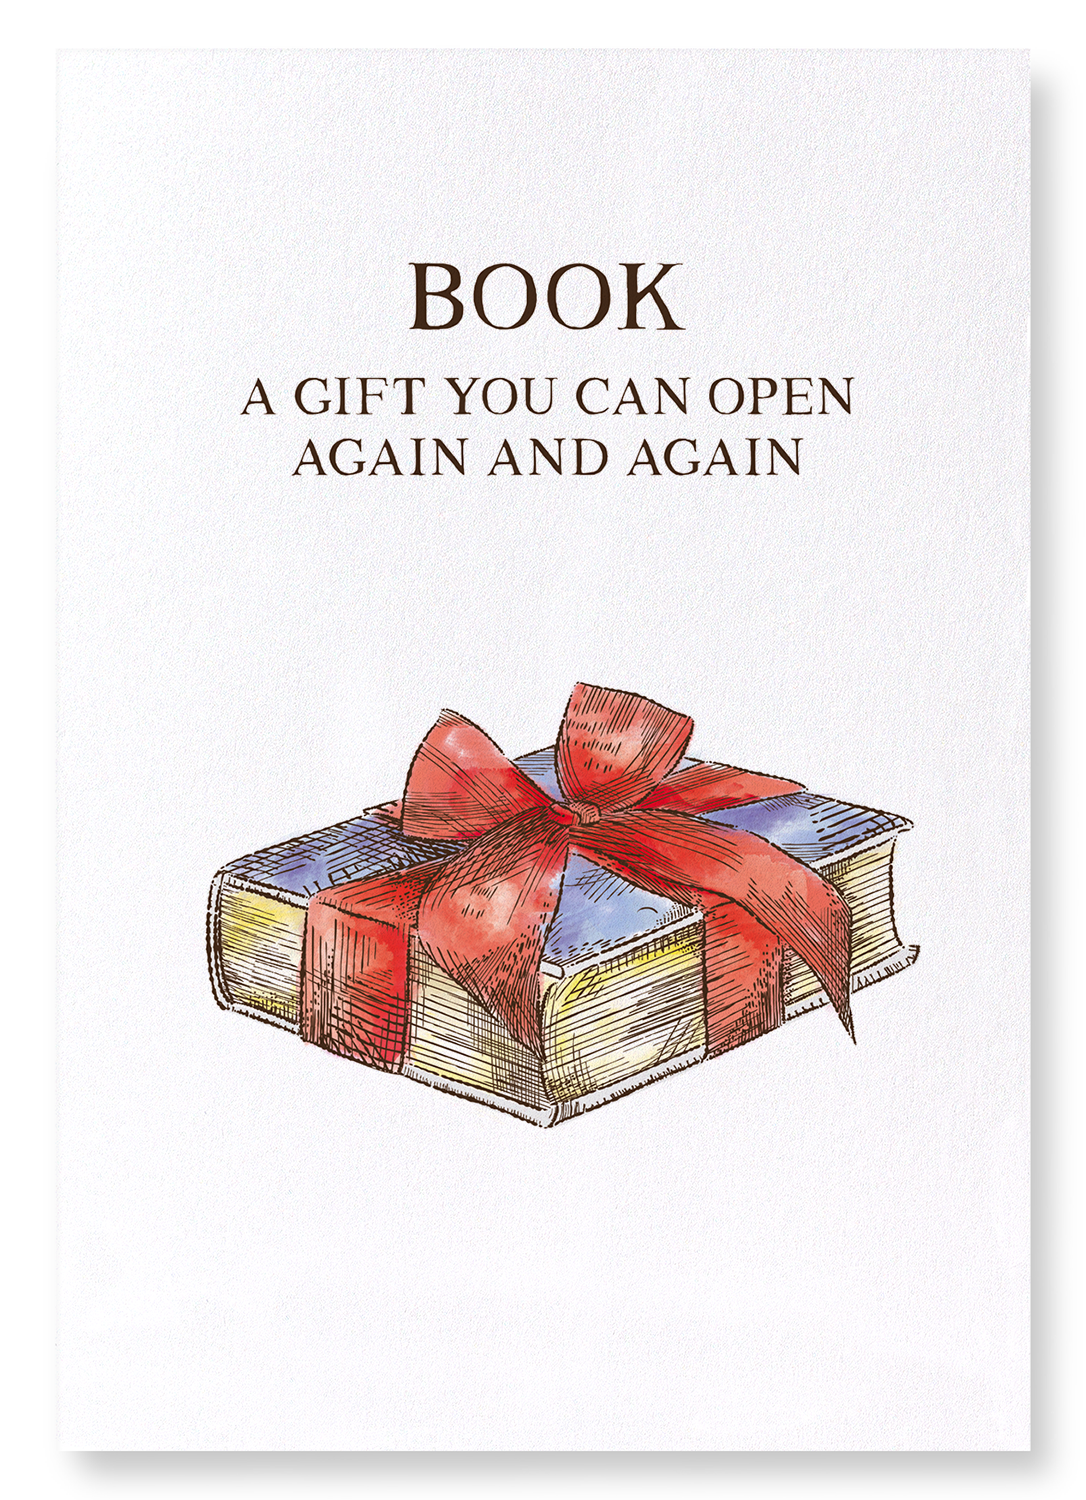 A BOOK IS A GIFT